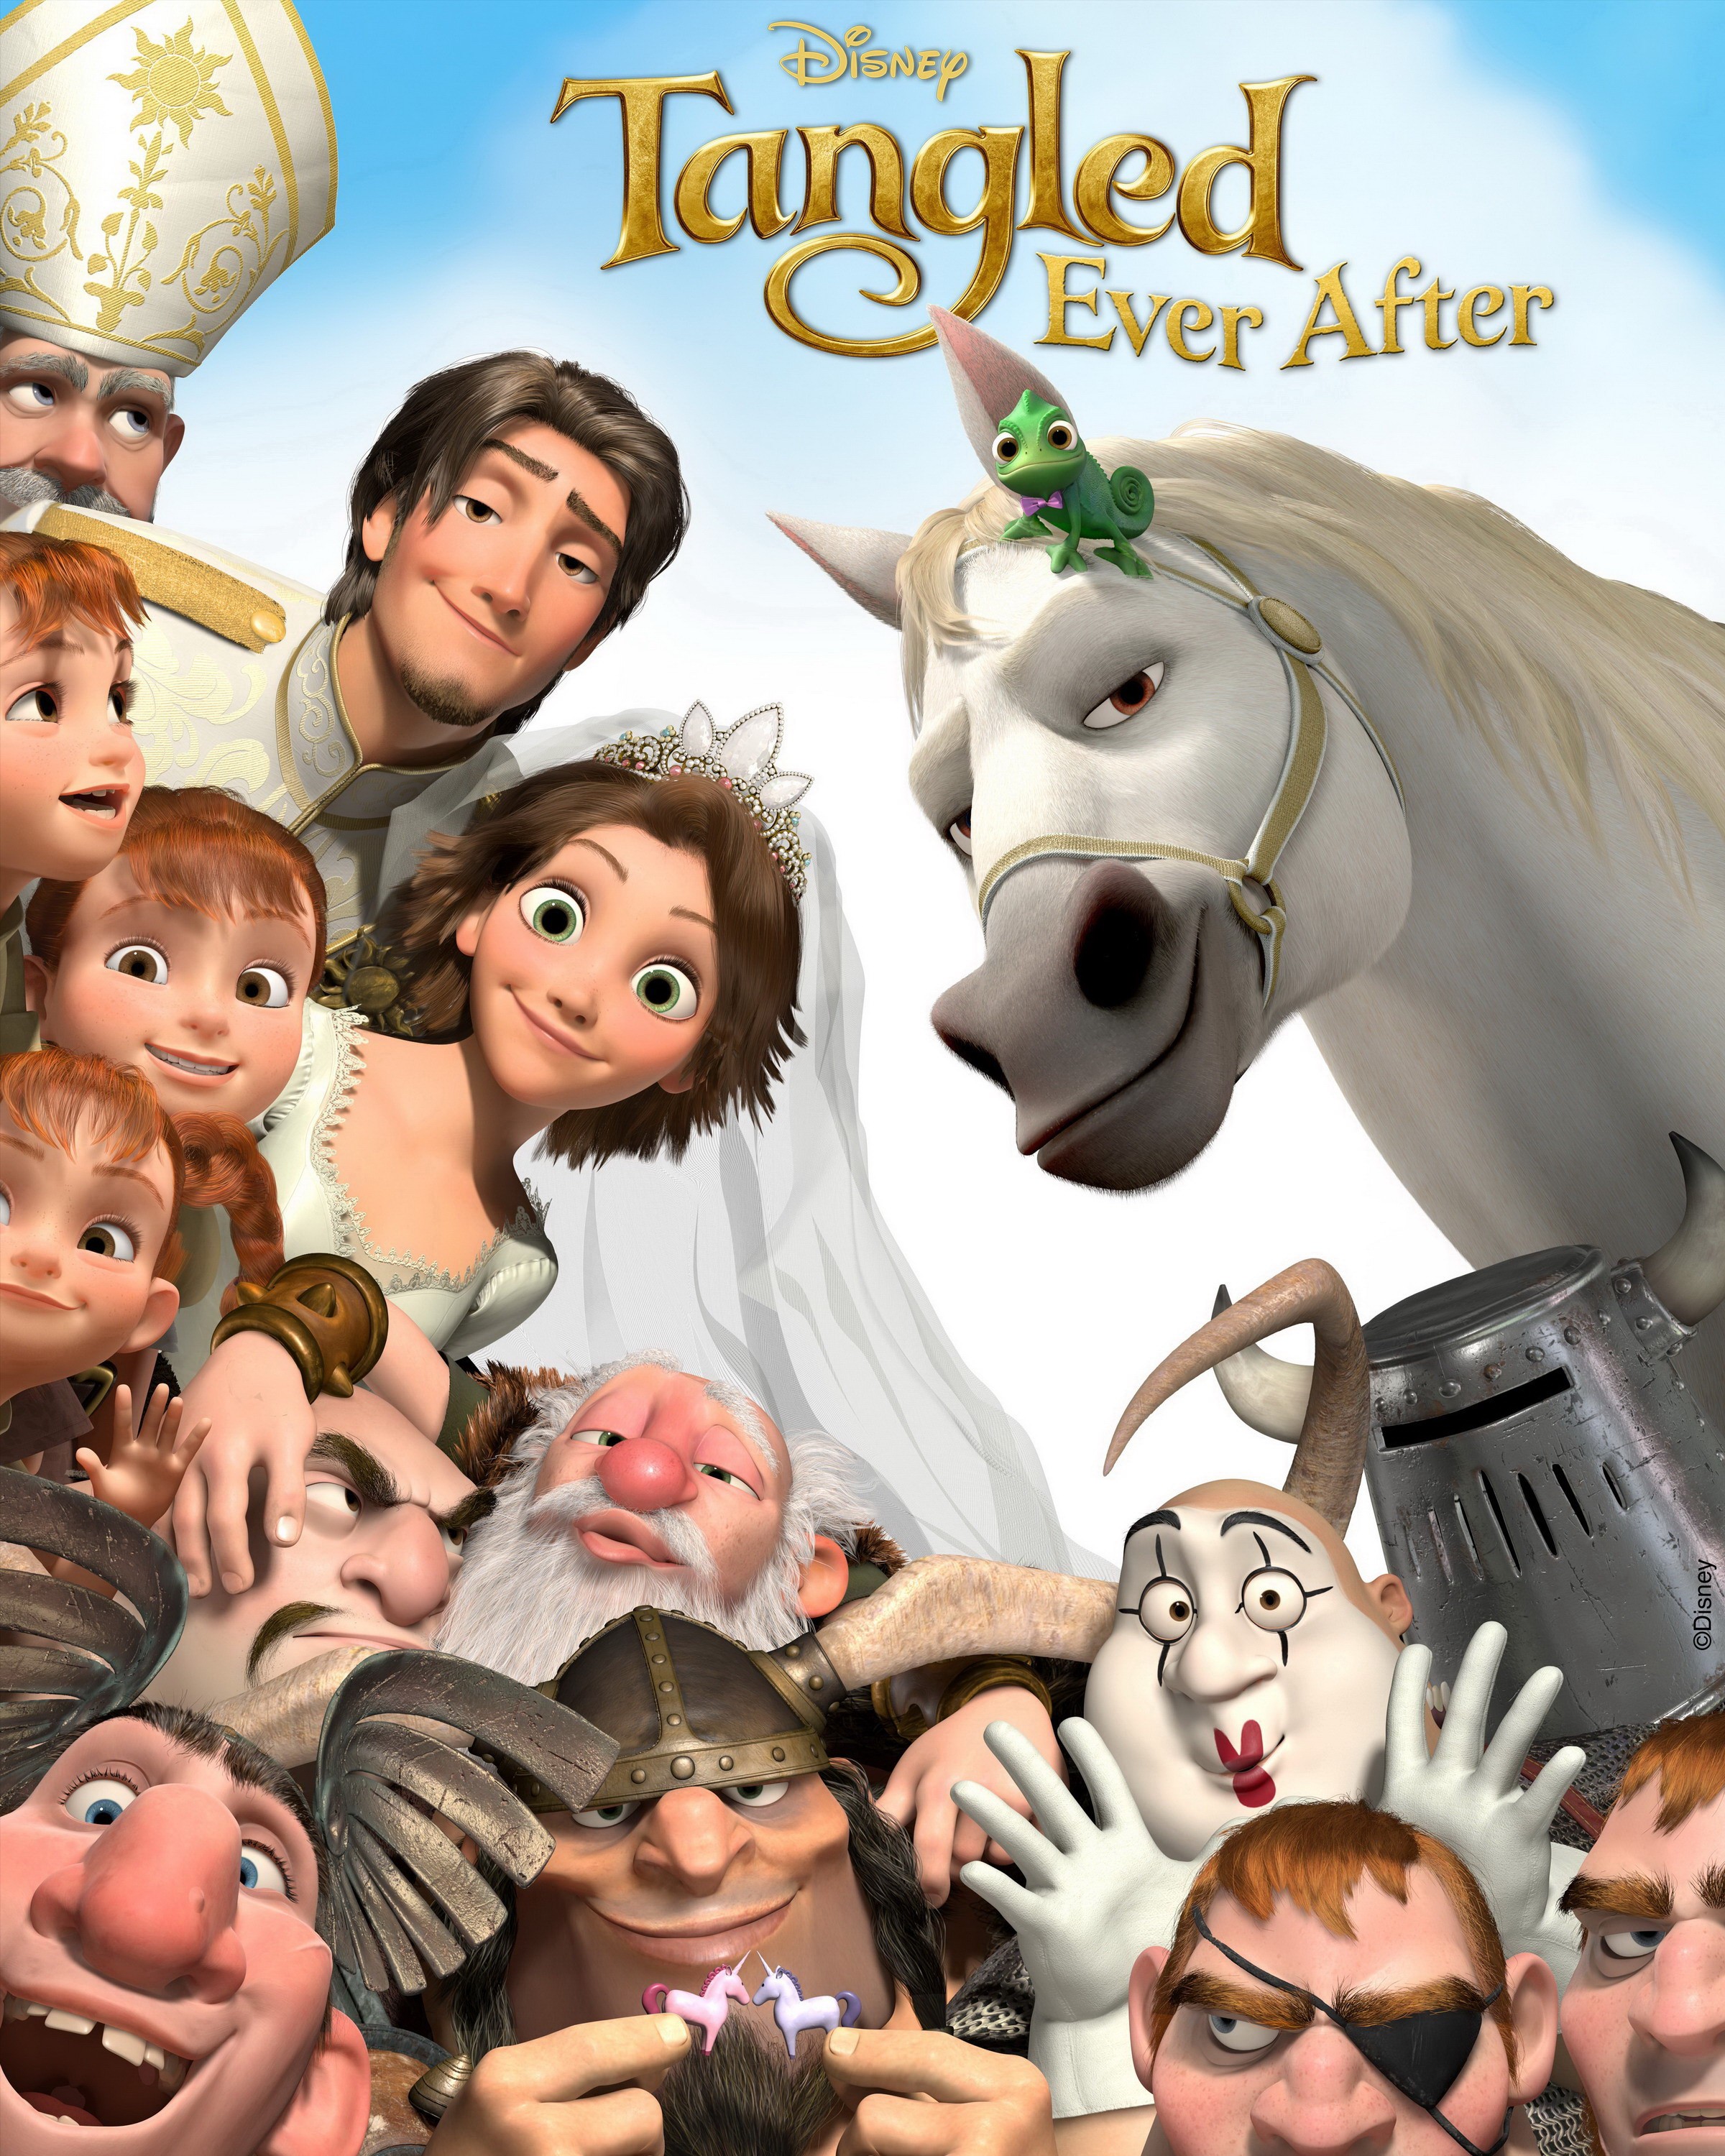 Mega Sized Movie Poster Image for Tangled Ever After